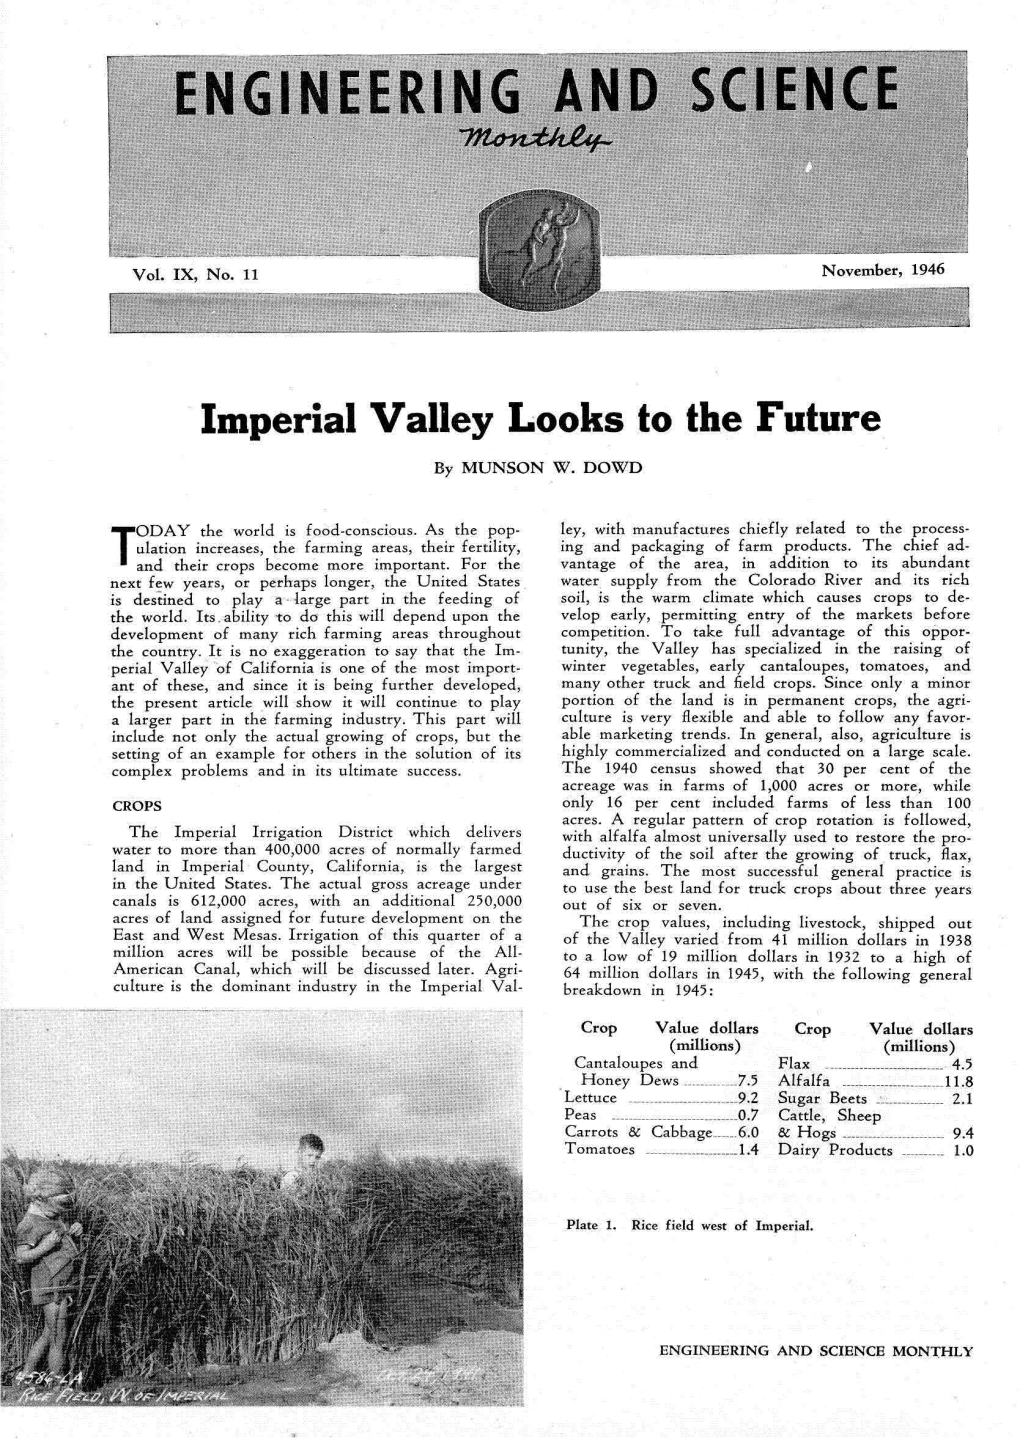 Imperial Valley Looks to the Future by MUNSON W